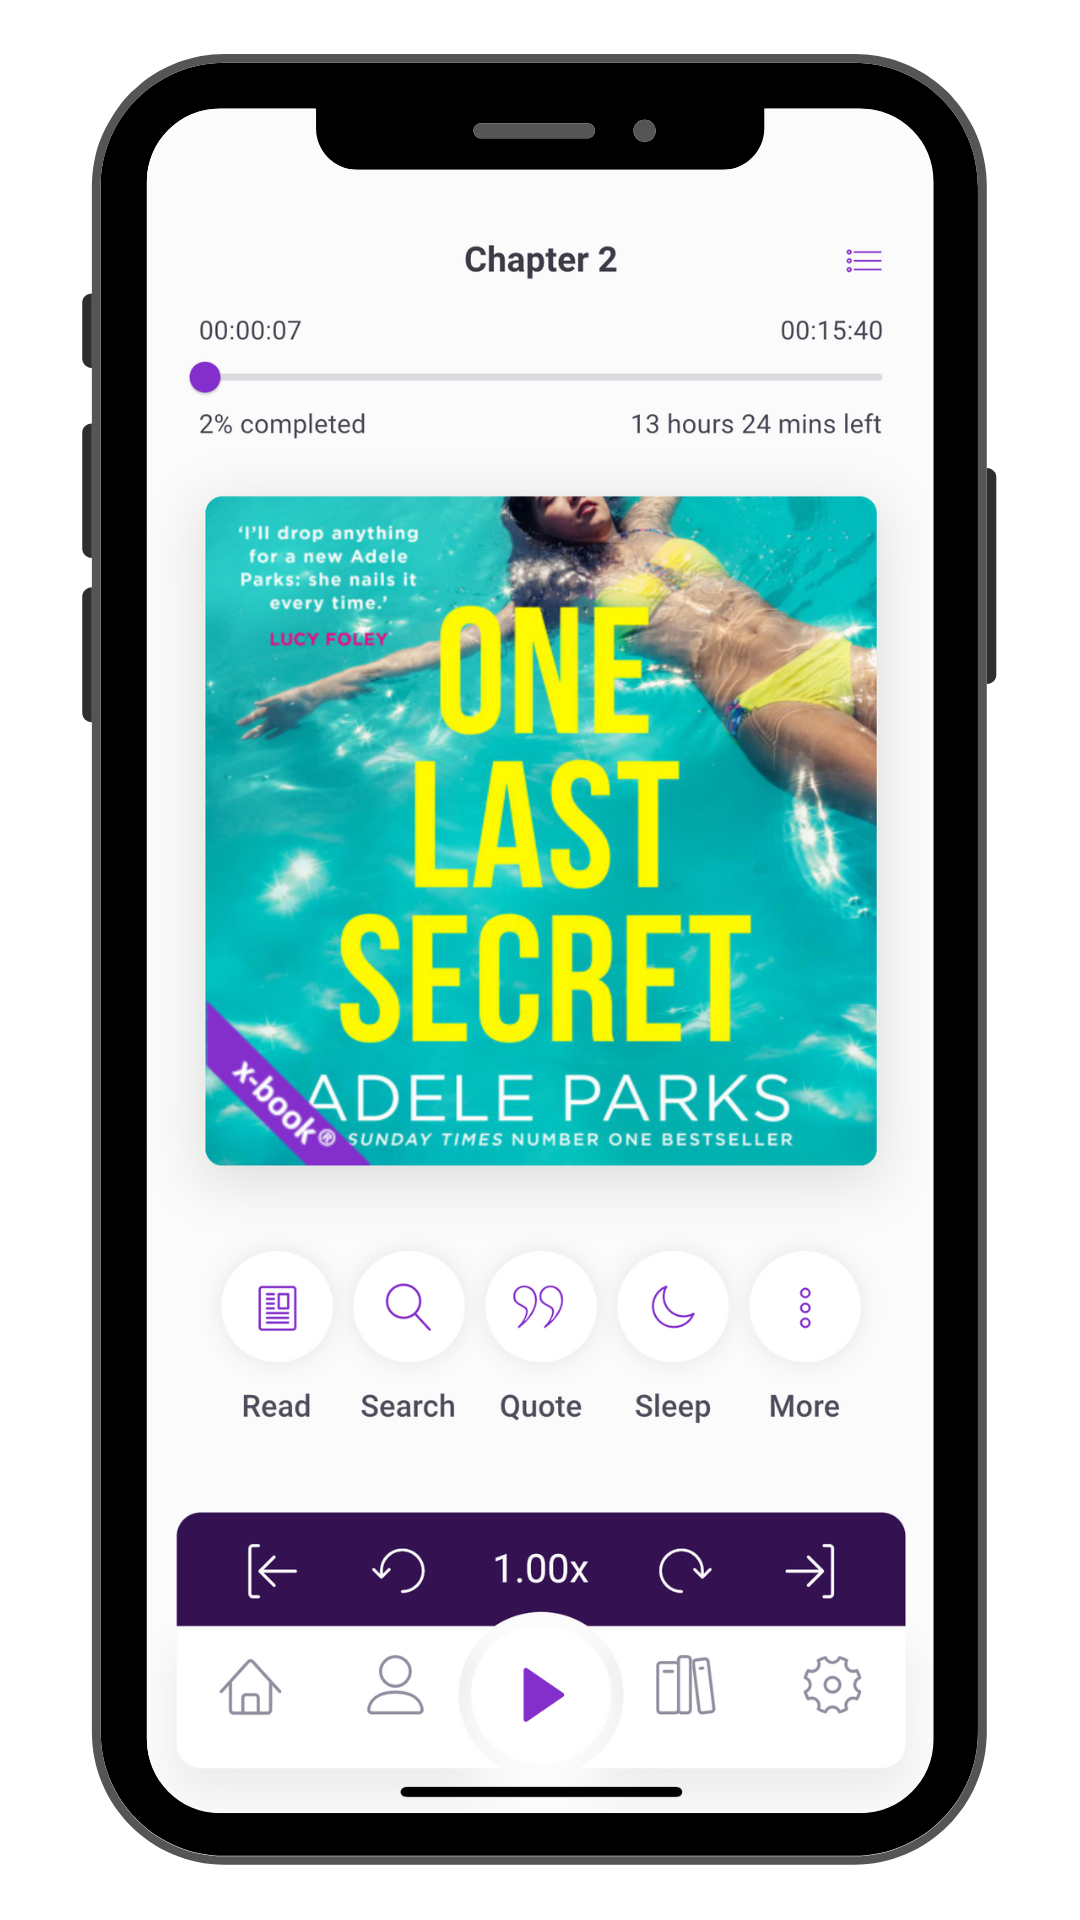 One Last Secret Audiobook and ebook in one on the xigxag app player